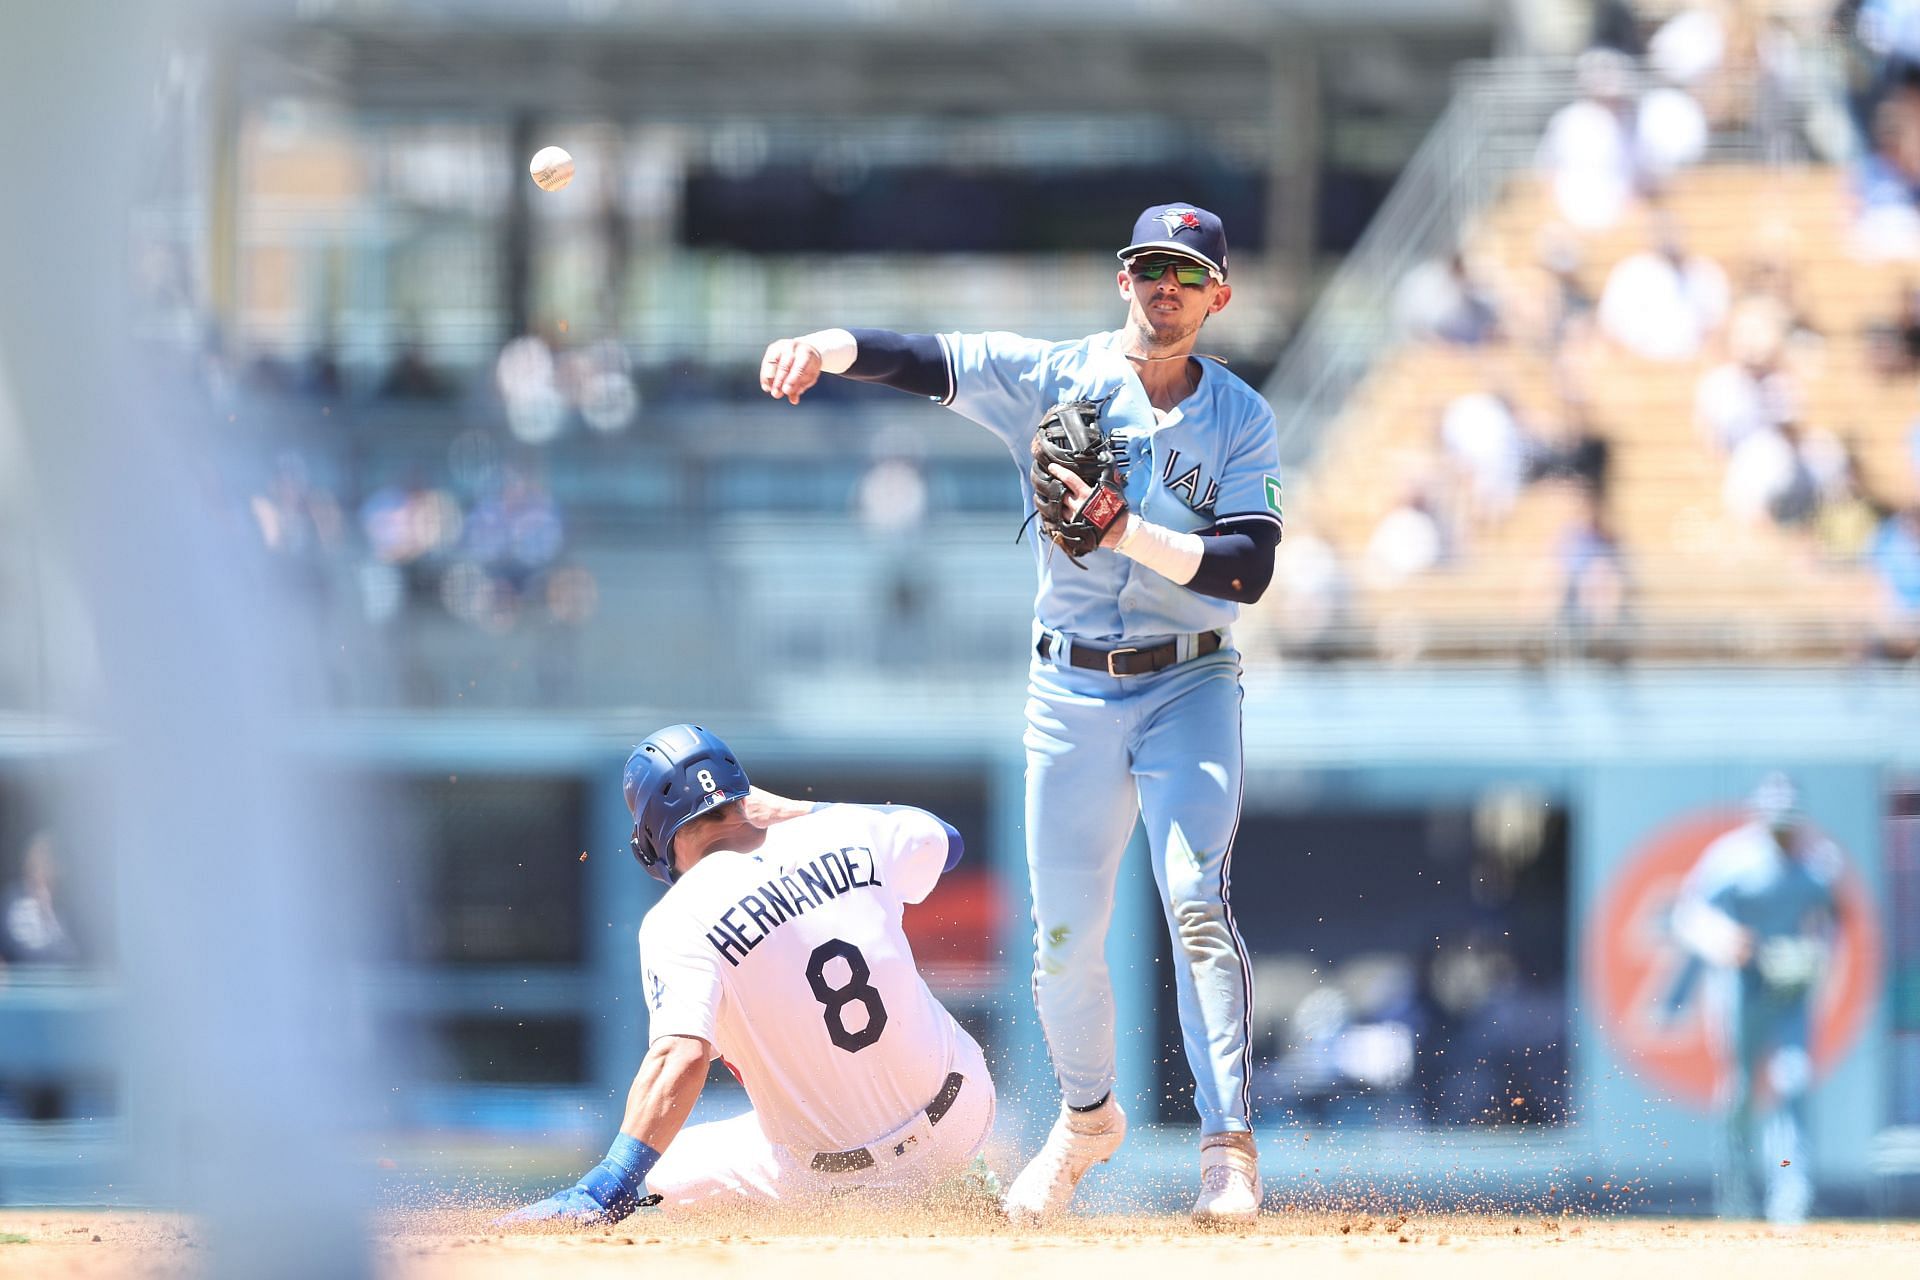 Cavan Biggio #8 of the Toronto Blue Jays tags out Enrique Hern&aacute;ndez #8 of the Los Angeles Dodgers and throws to first for a double play during the fourth inning at Dodger Stadium on July 26, 2023 in Los Angeles, California. (Photo by Michael Owens/Getty Images)